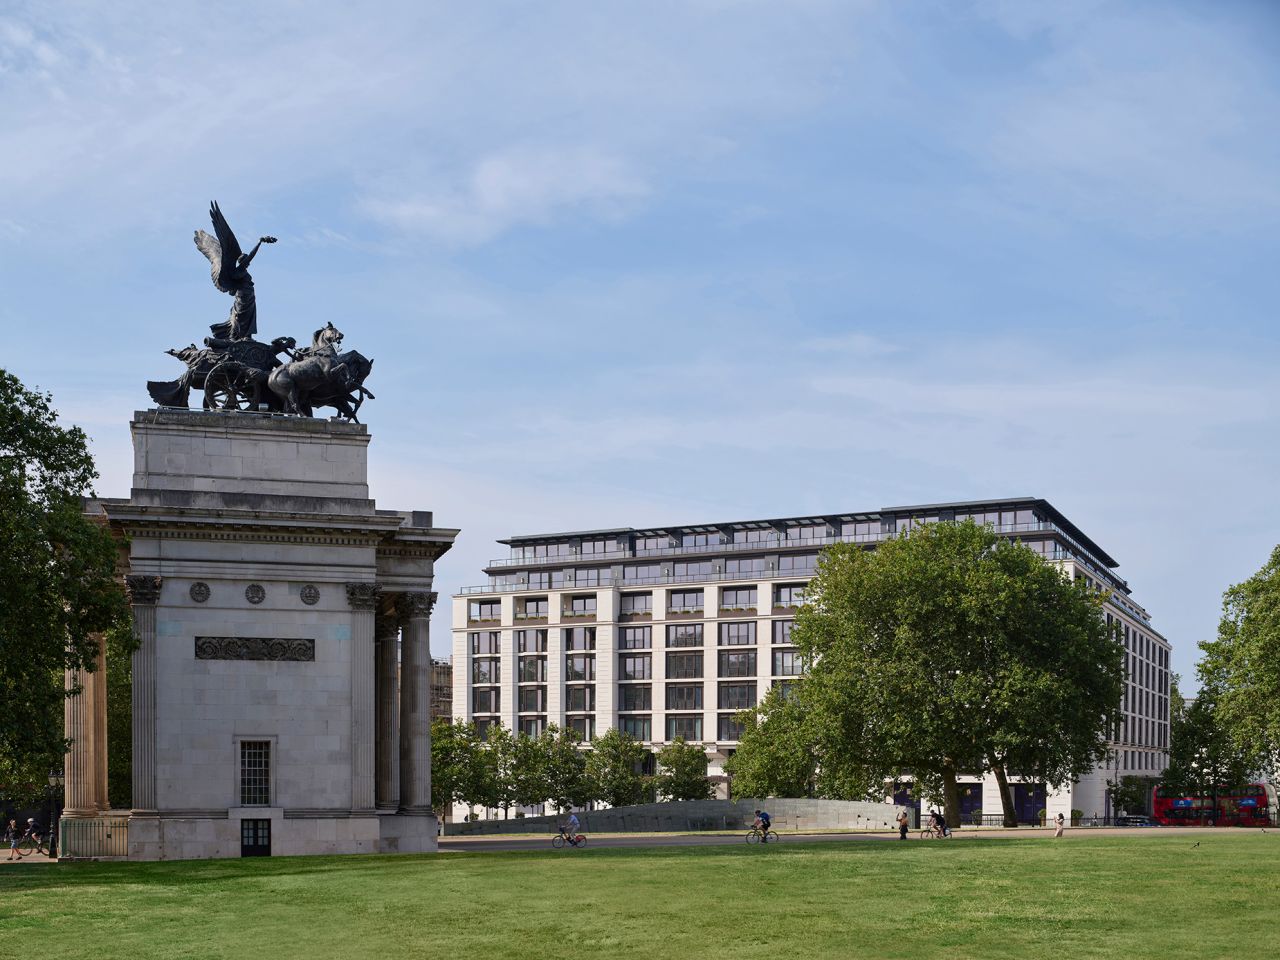 The newly built hotel is located close to Hyde Park Corner, Wellington Arch and a short distance from Buckingham Palace.